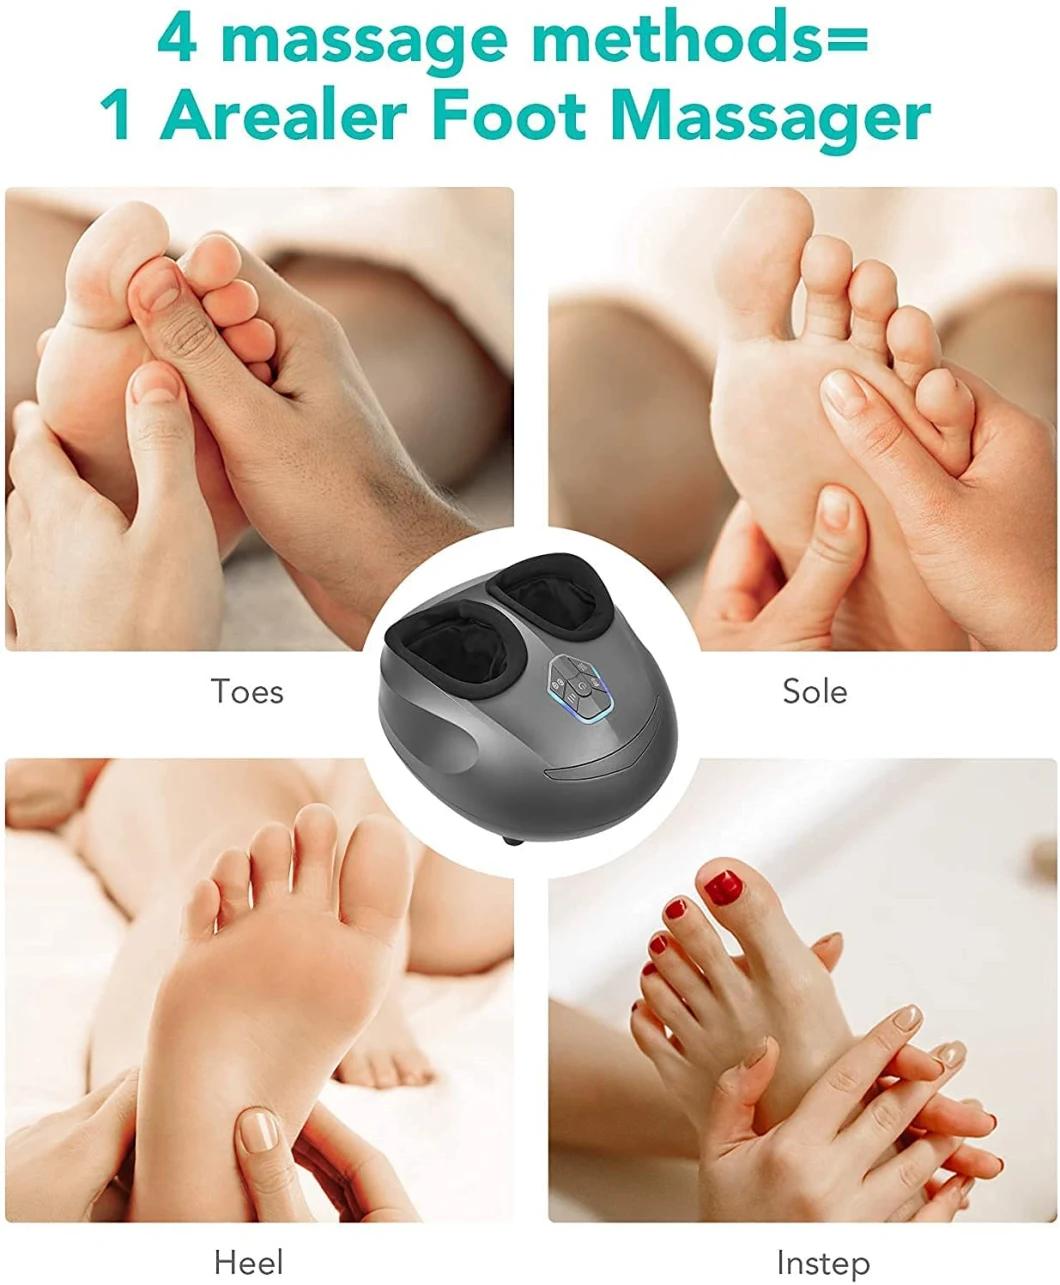 Foot Massager Machine with Heat, Shiatsu Deep Kneading, Multi-Level Settings, Delivers Relief for Tired Muscles and Plantar Fasciitis, Feet up to Men Size 12